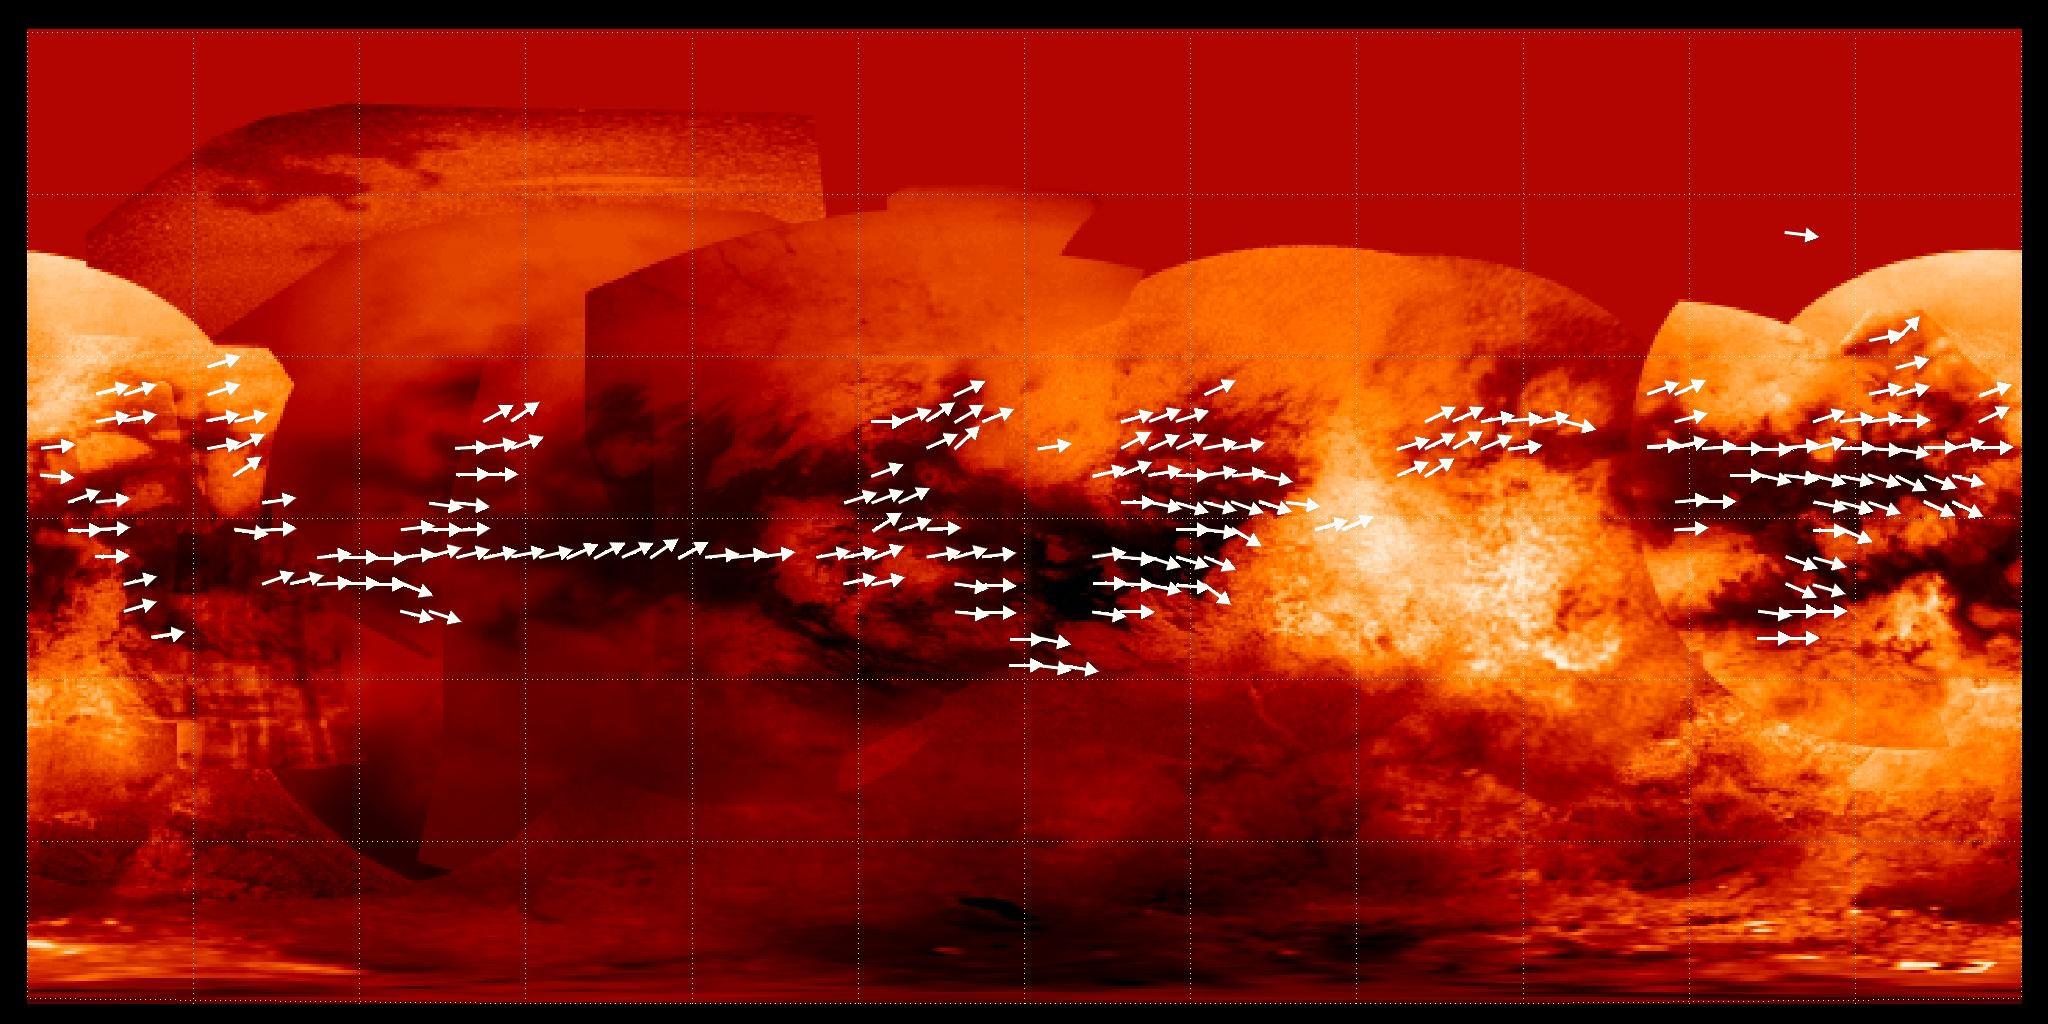 Scientists have used data from the Cassini radar mapper to map the global wind pattern on Saturn's moon Titan using data collected over a four-year period, as depicted in this image. 